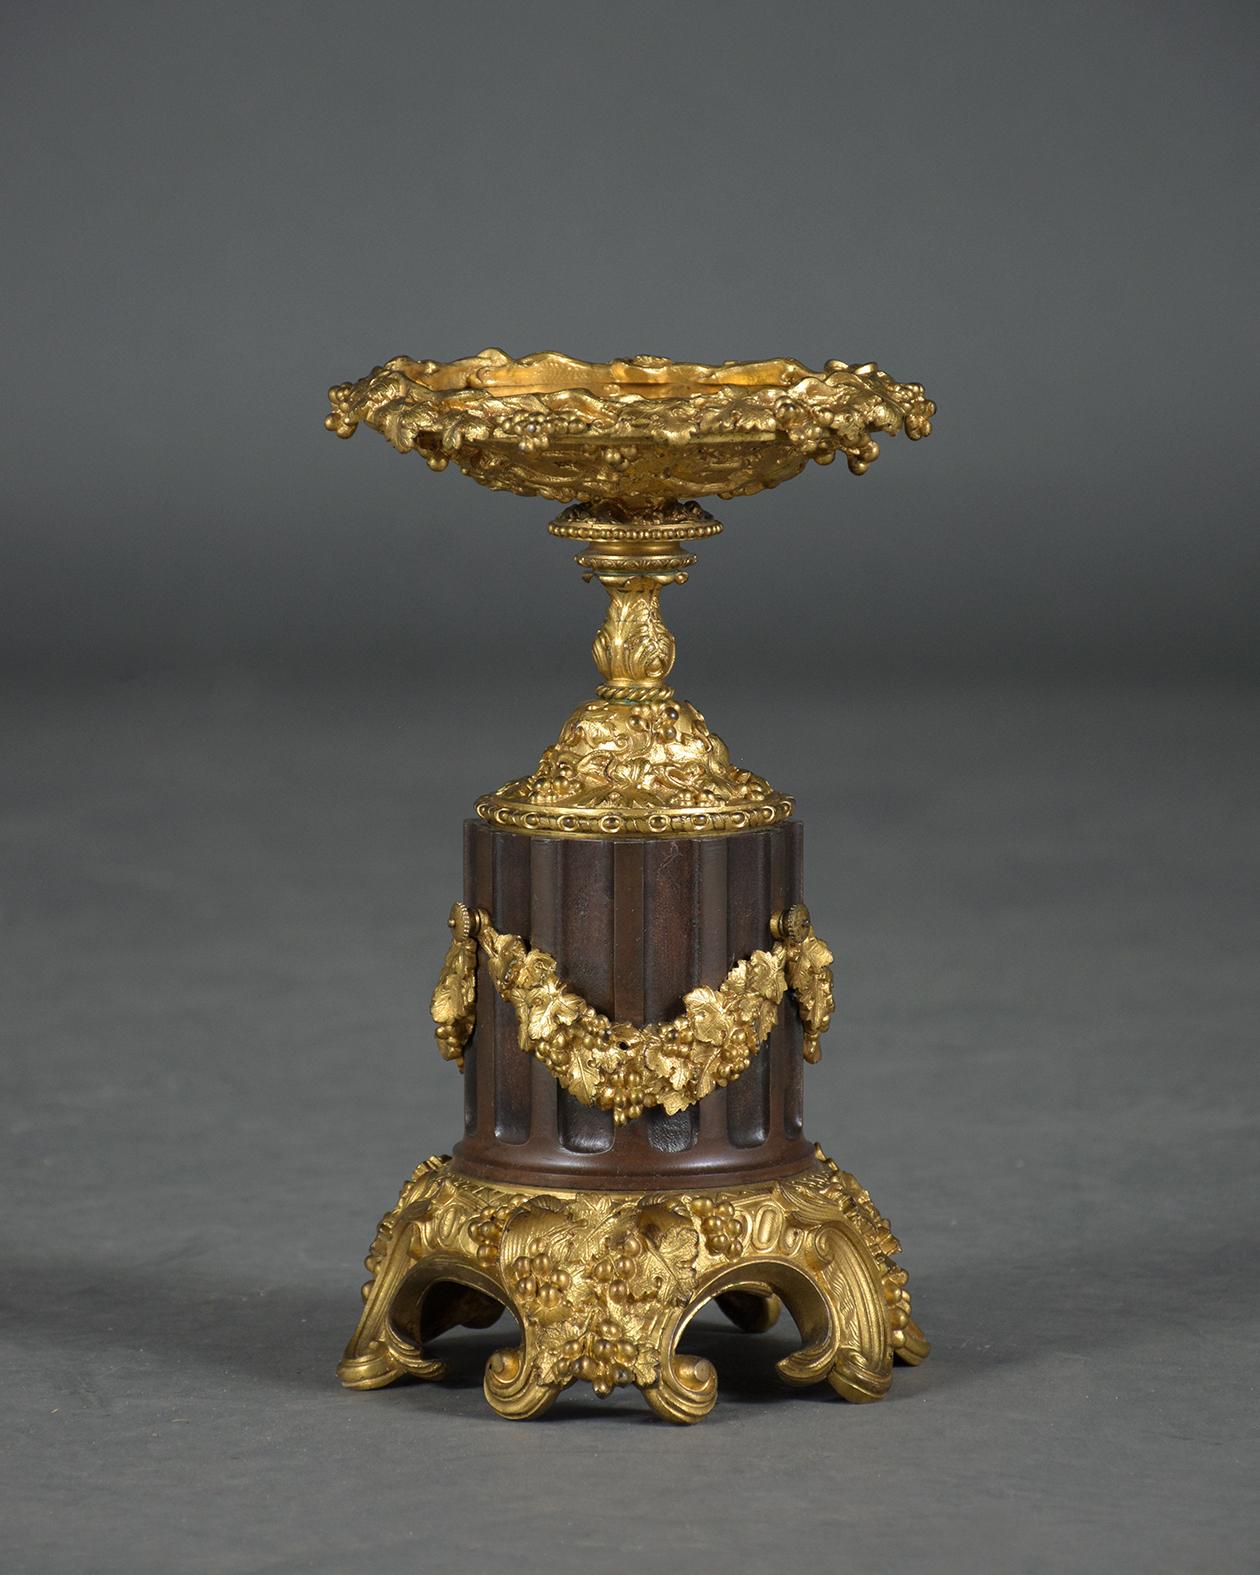 Elegant 19th-Century French Bronzed Urns with Gold Ormolu Details For Sale 2